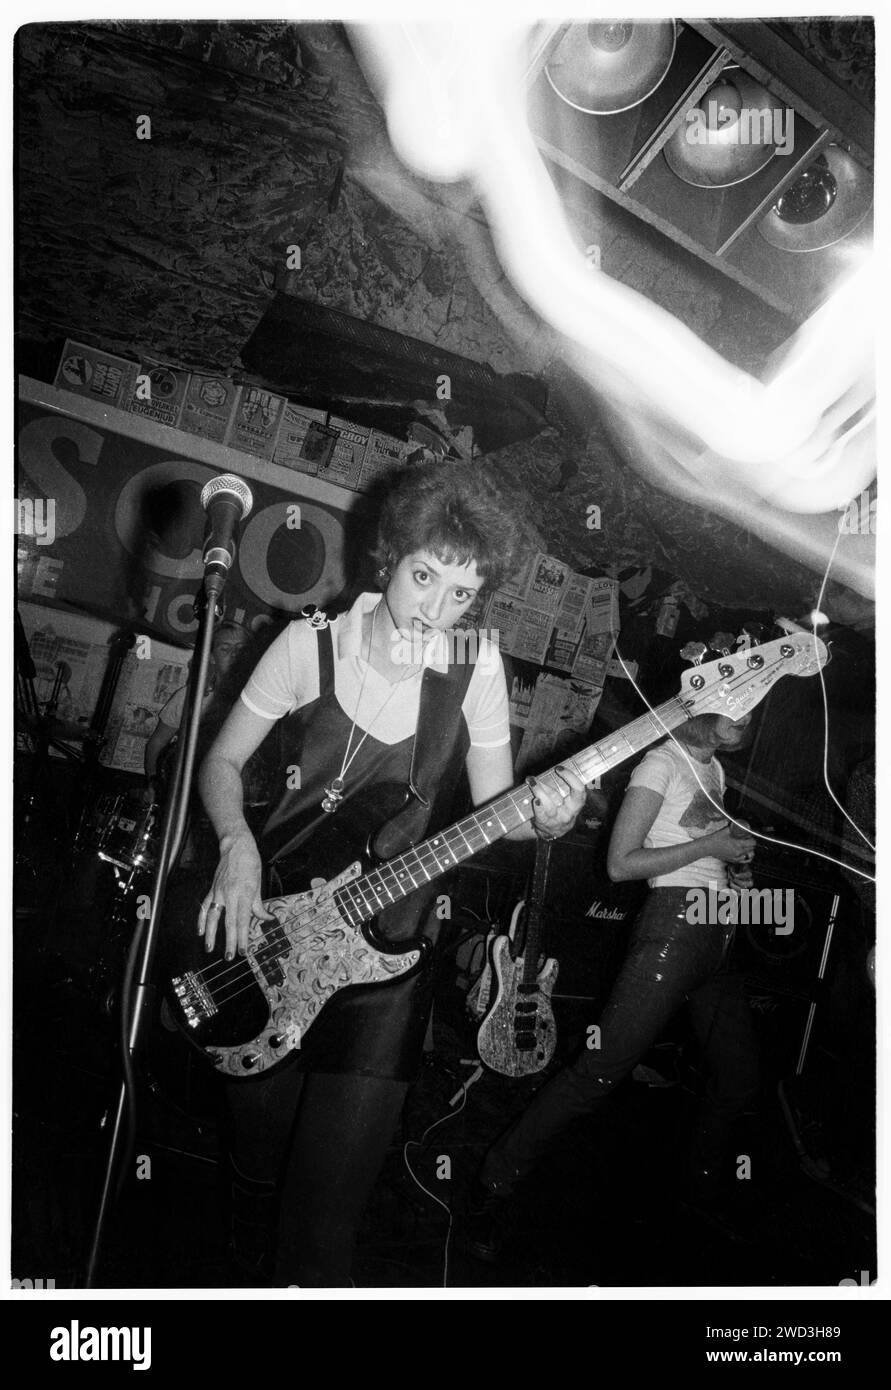 Marika Gauci of Welsh punk band Gouge playing live at Newprt TJs on 28 August 1994. Indie rock band formed in Cardiff, Wales in 1992. After two successful singles they split up during the recording of what would have been their debut album in 1995. Stock Photo